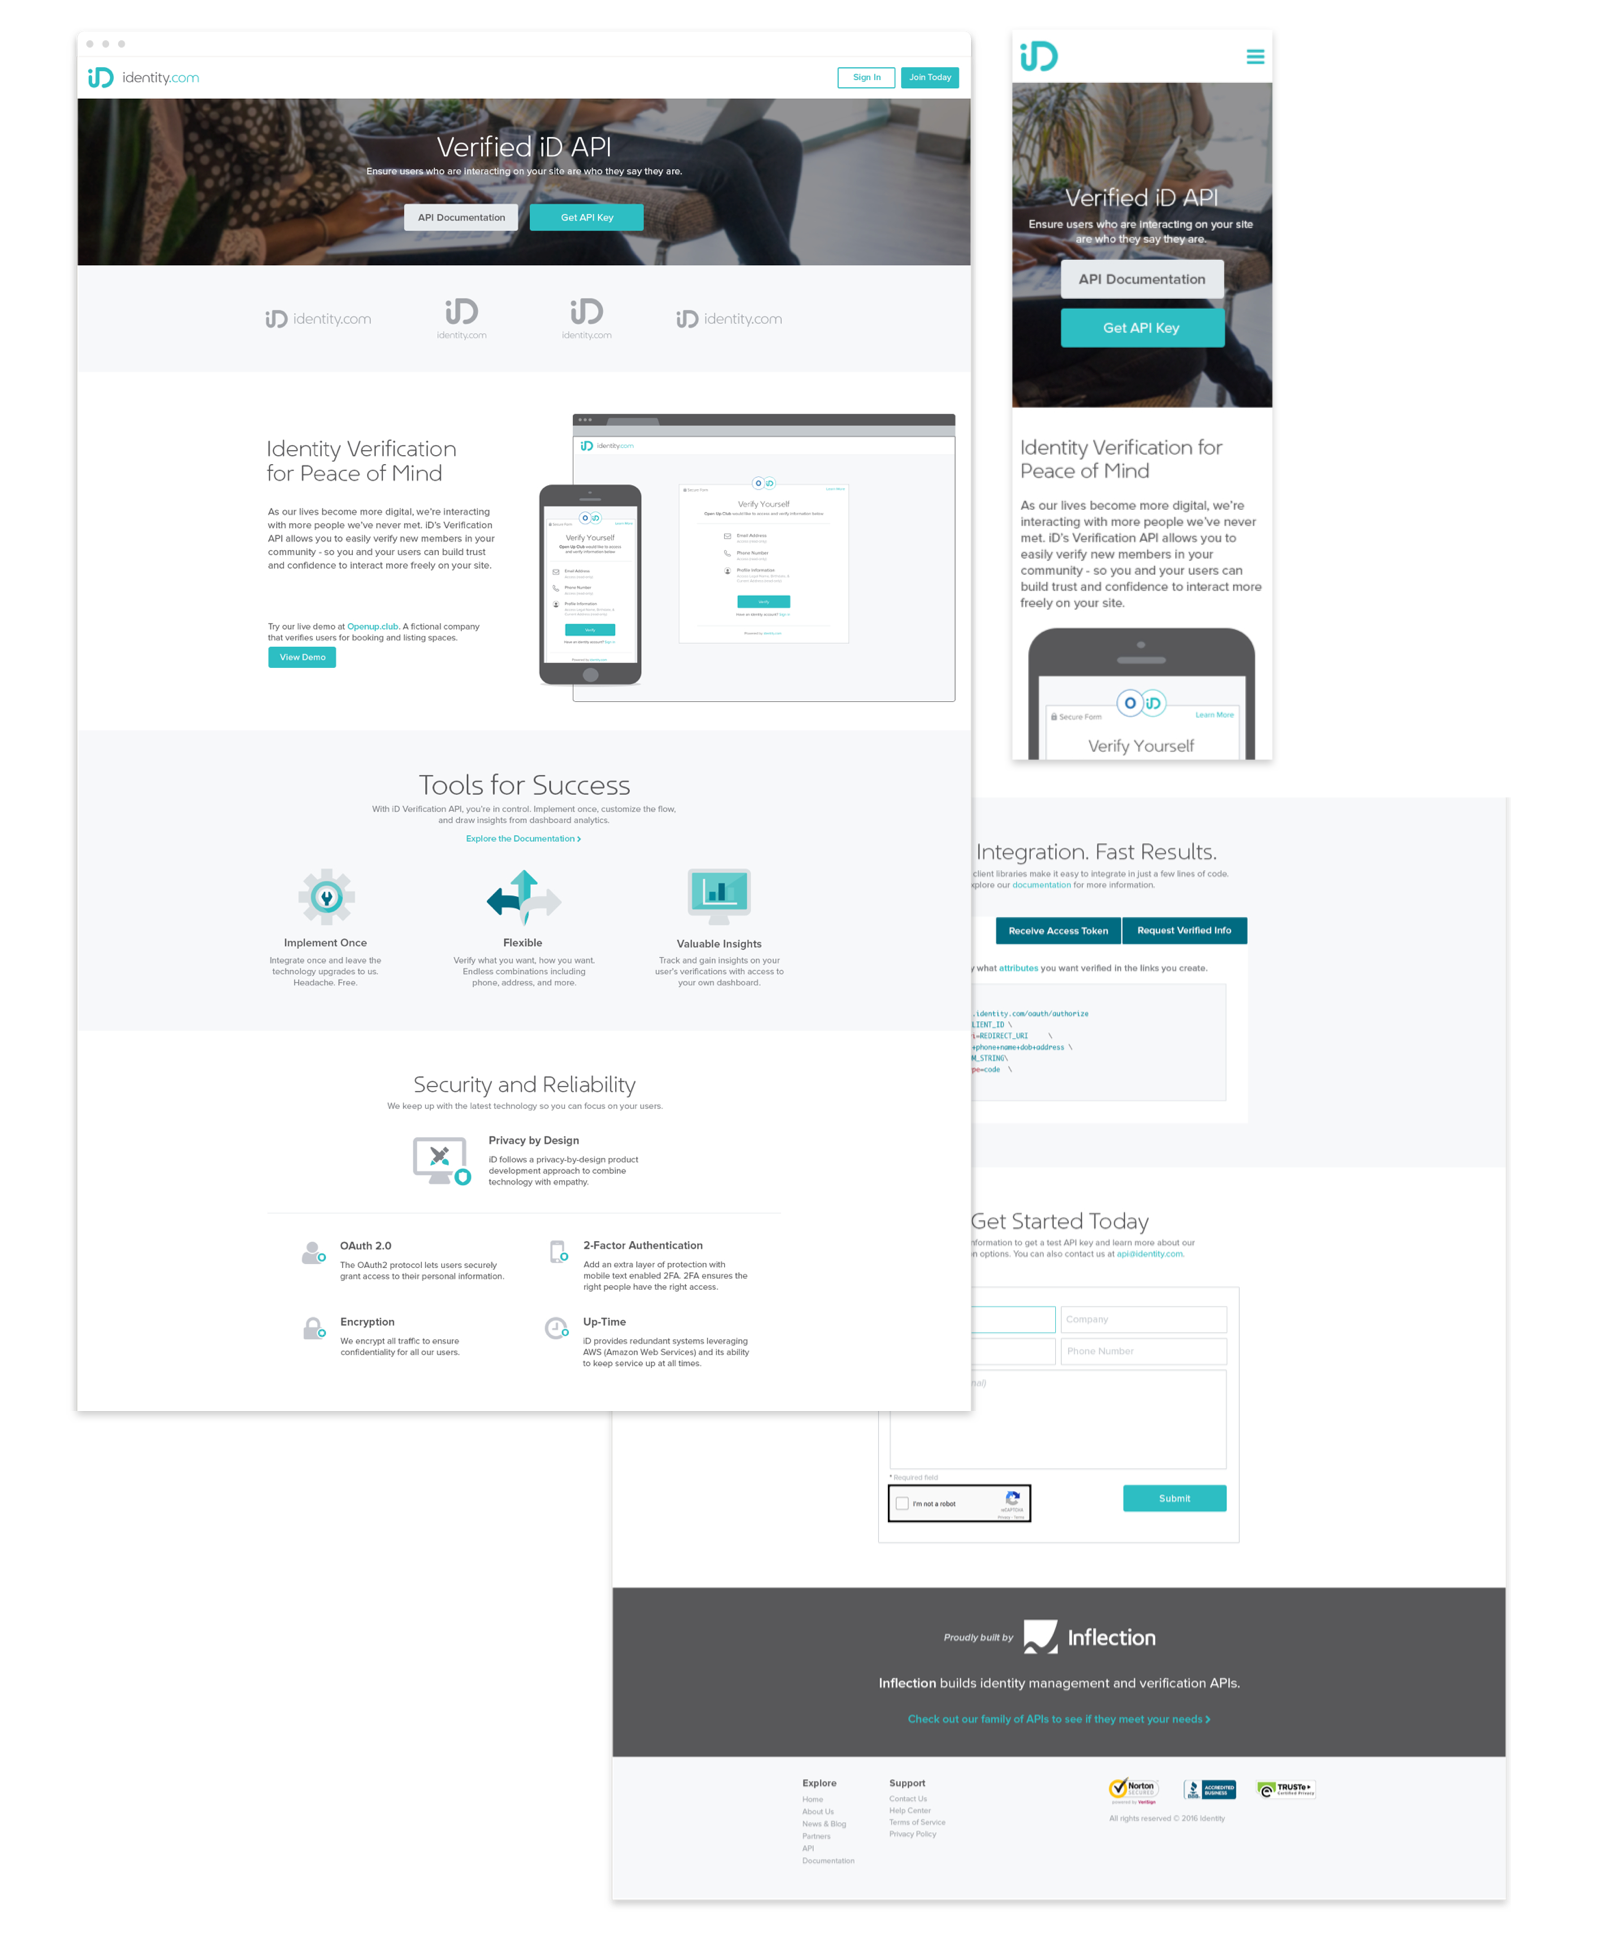 Desktop and Mobile Marketing Landing Page for the iD Verified API Offering